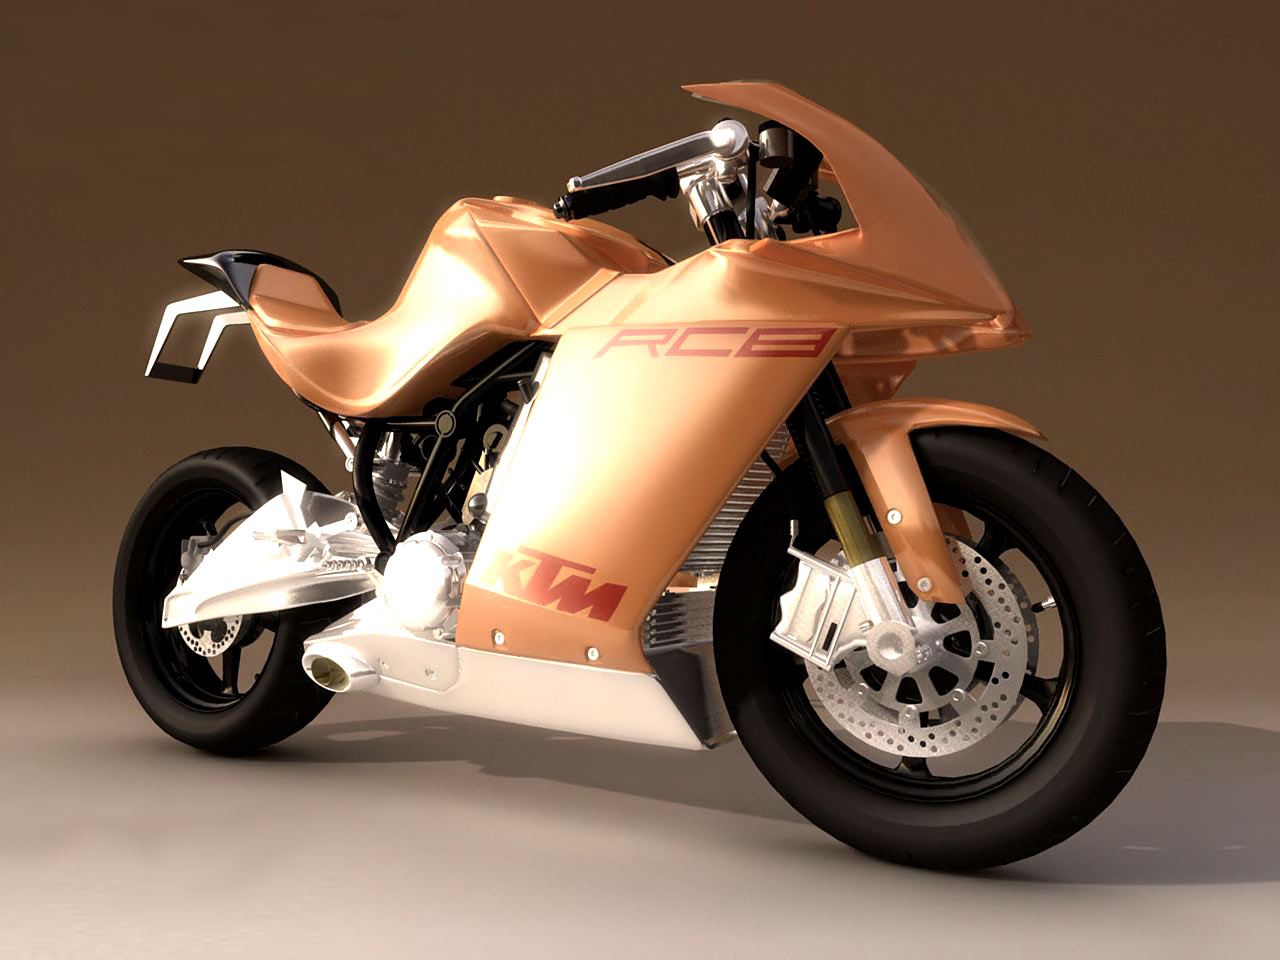 Bike Images Download - Wallpapers High Definition